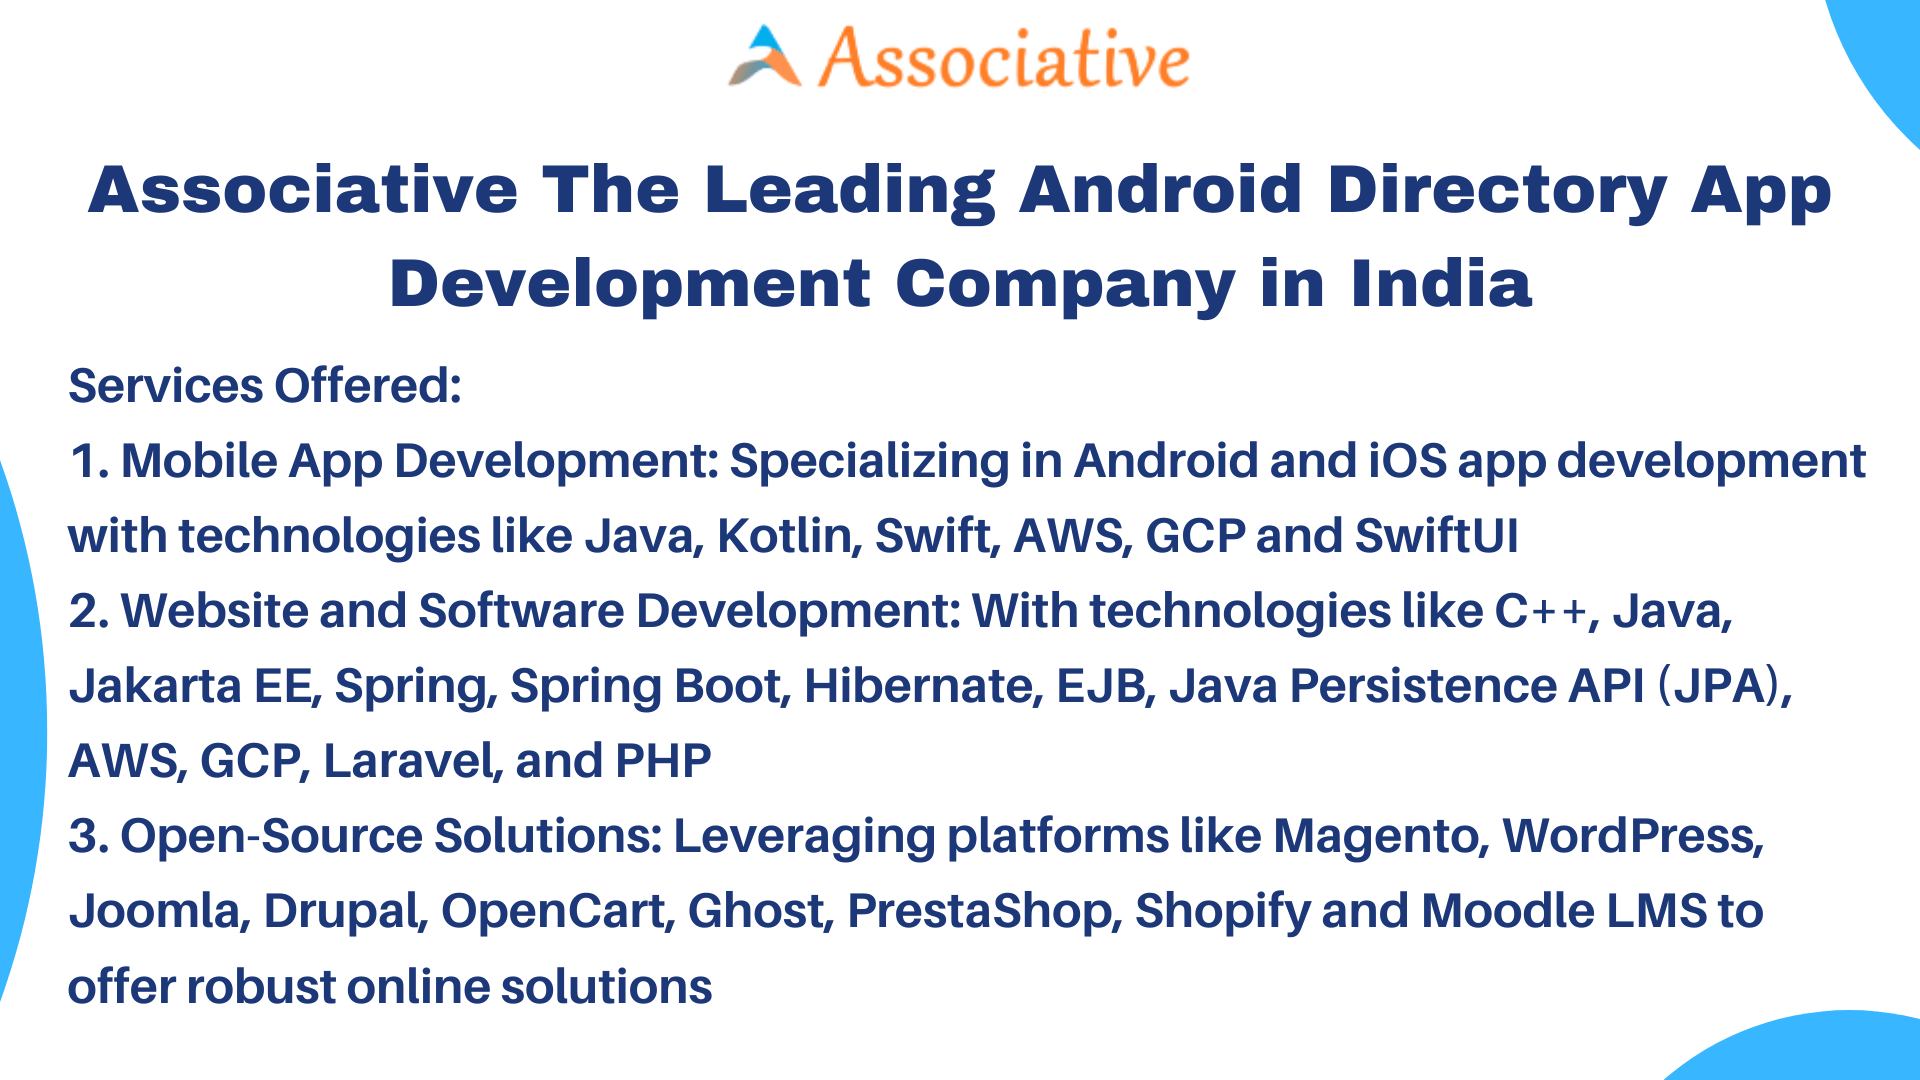 Associative The Leading Android Directory App Development Company in India